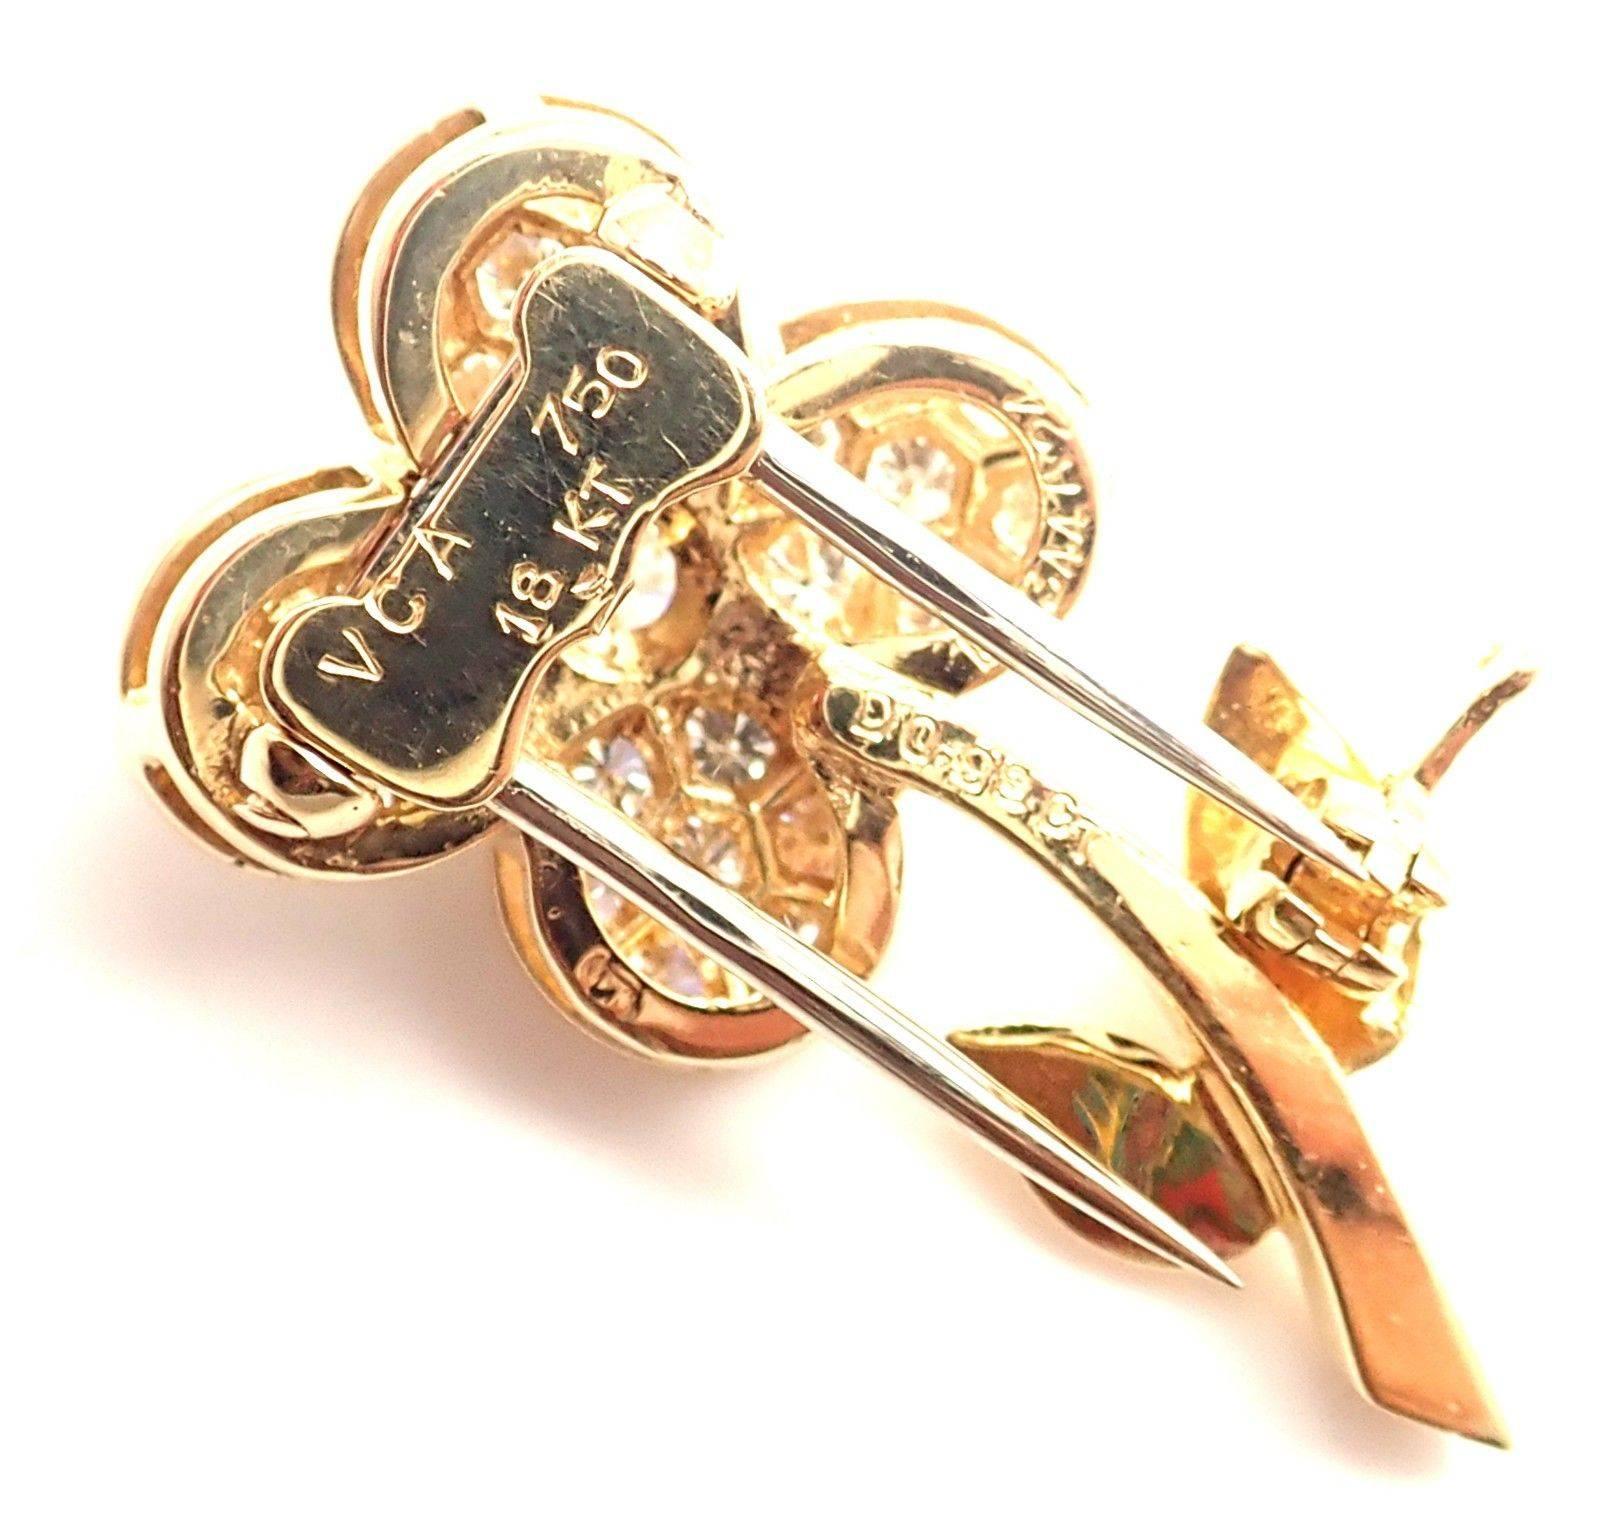 Van Cleef & Arpels Diamond Flower Yellow Gold Pin Brooch In New Condition For Sale In Holland, PA